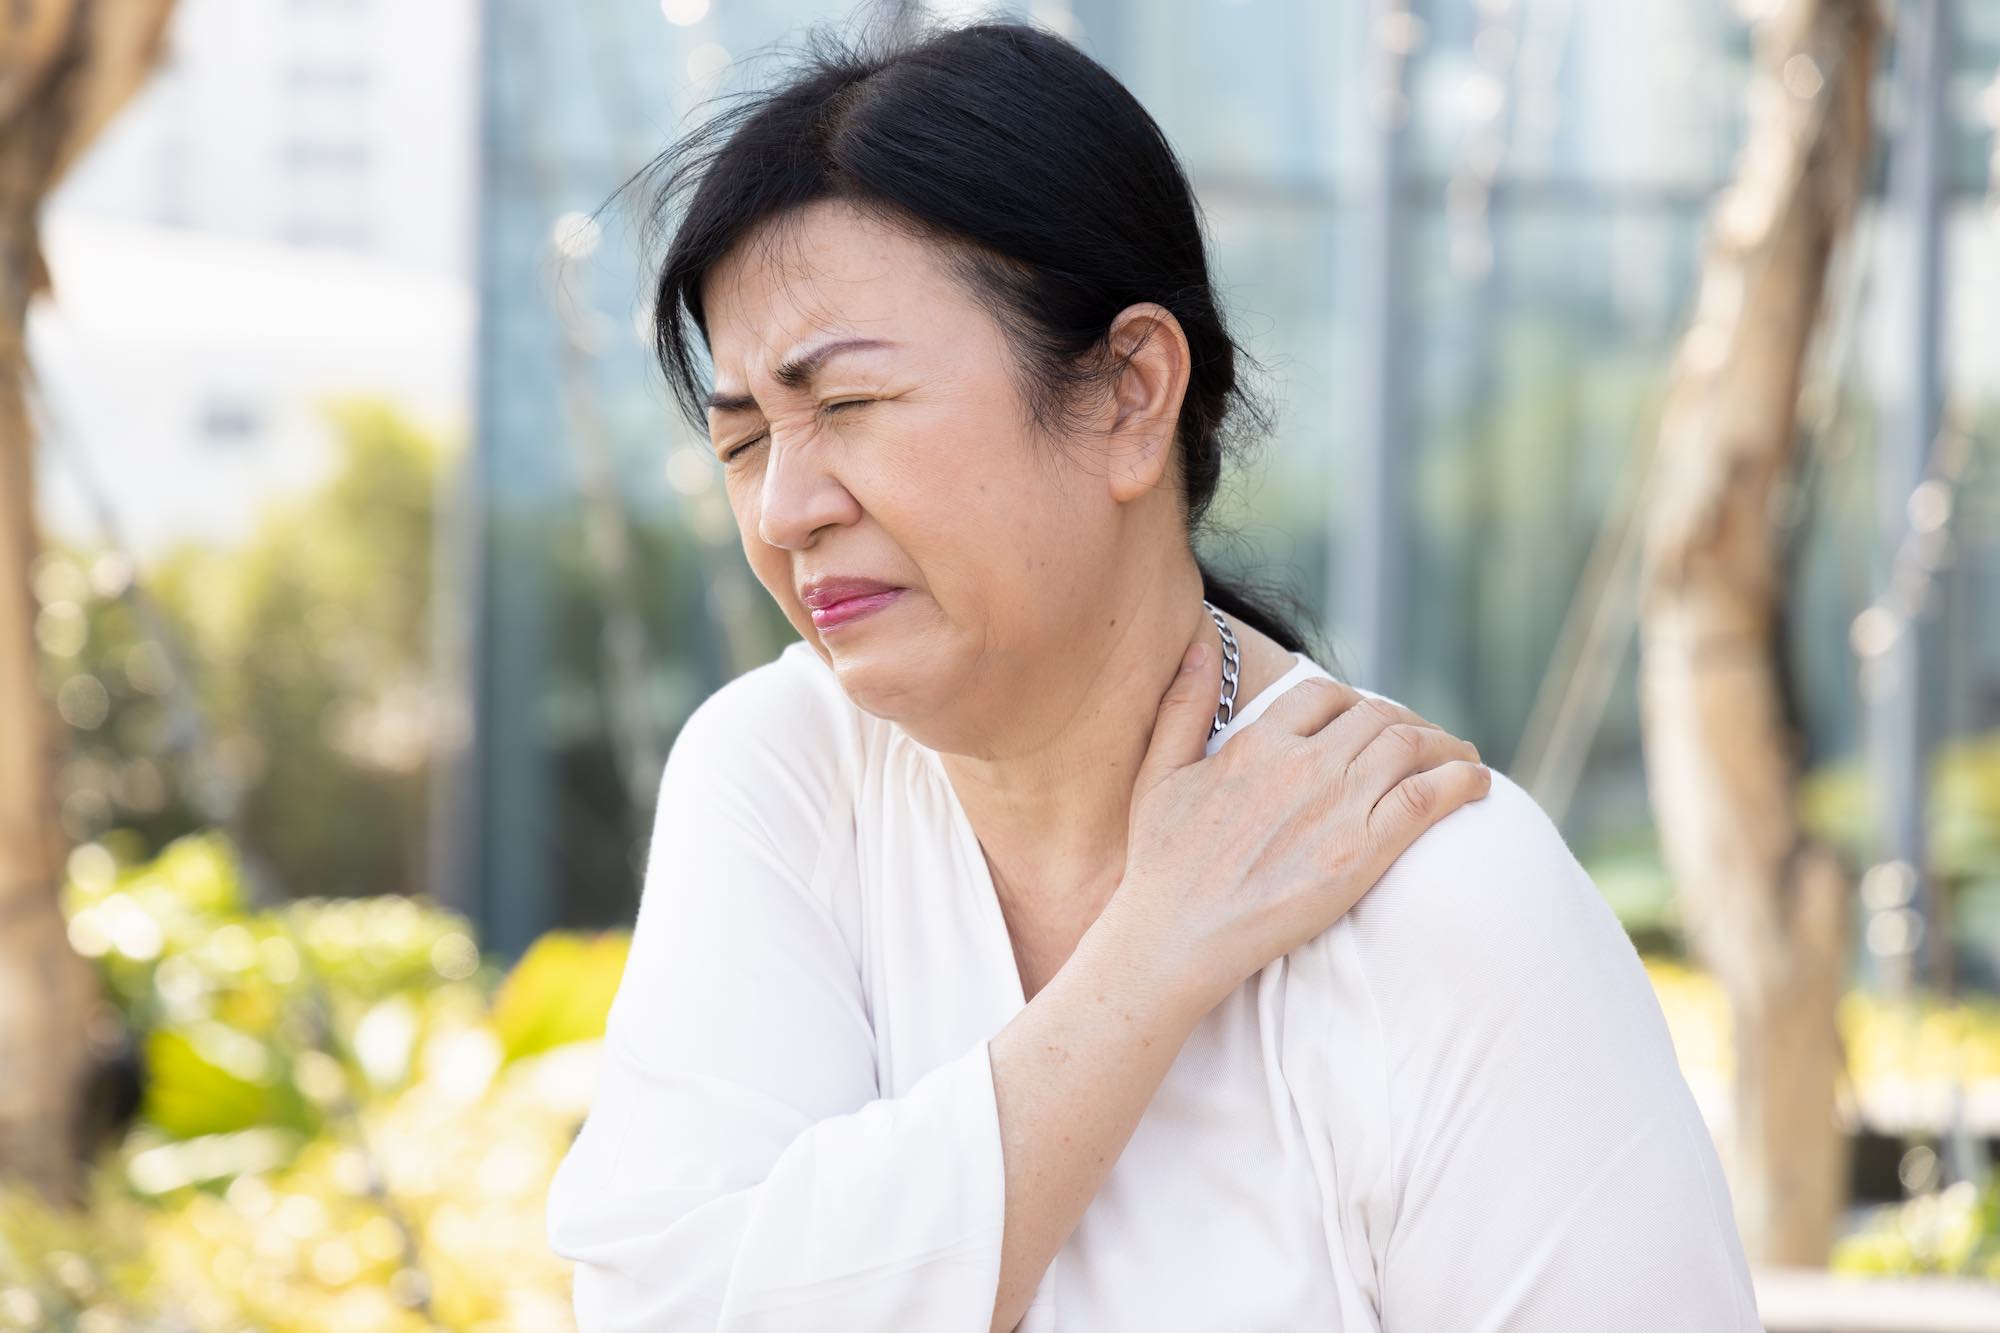 Frozen Shoulder: Symptoms, Treatment and Recovery